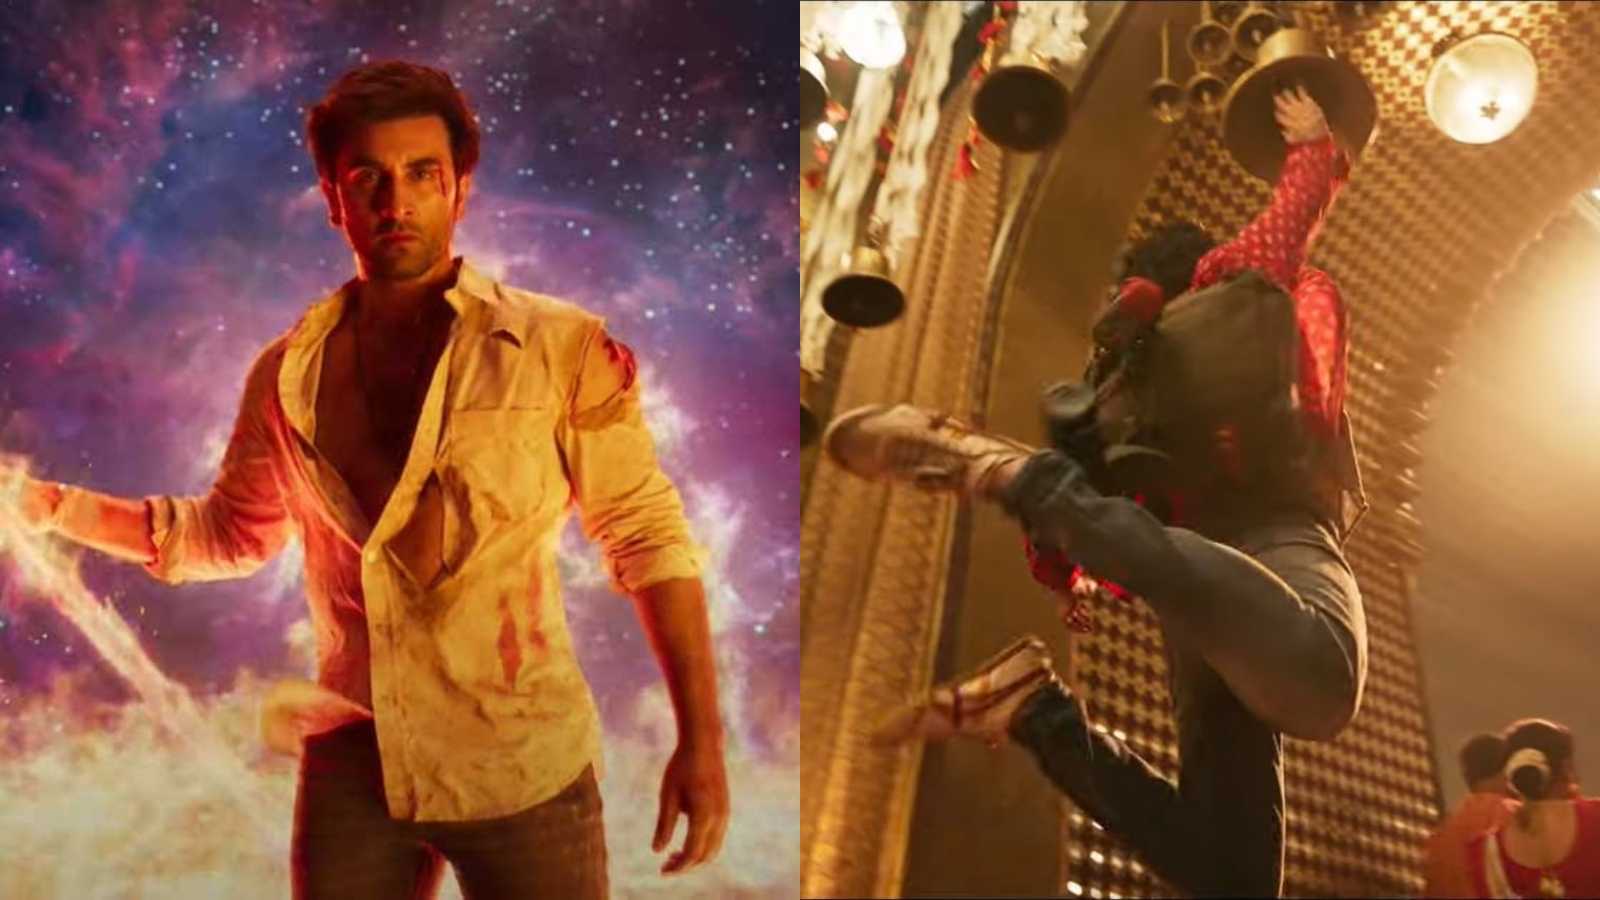 Brahmastra trailer faces backlash for showing Ranbir Kapoor wearing shoes in a temple, netizens call it an 'epic disaster'